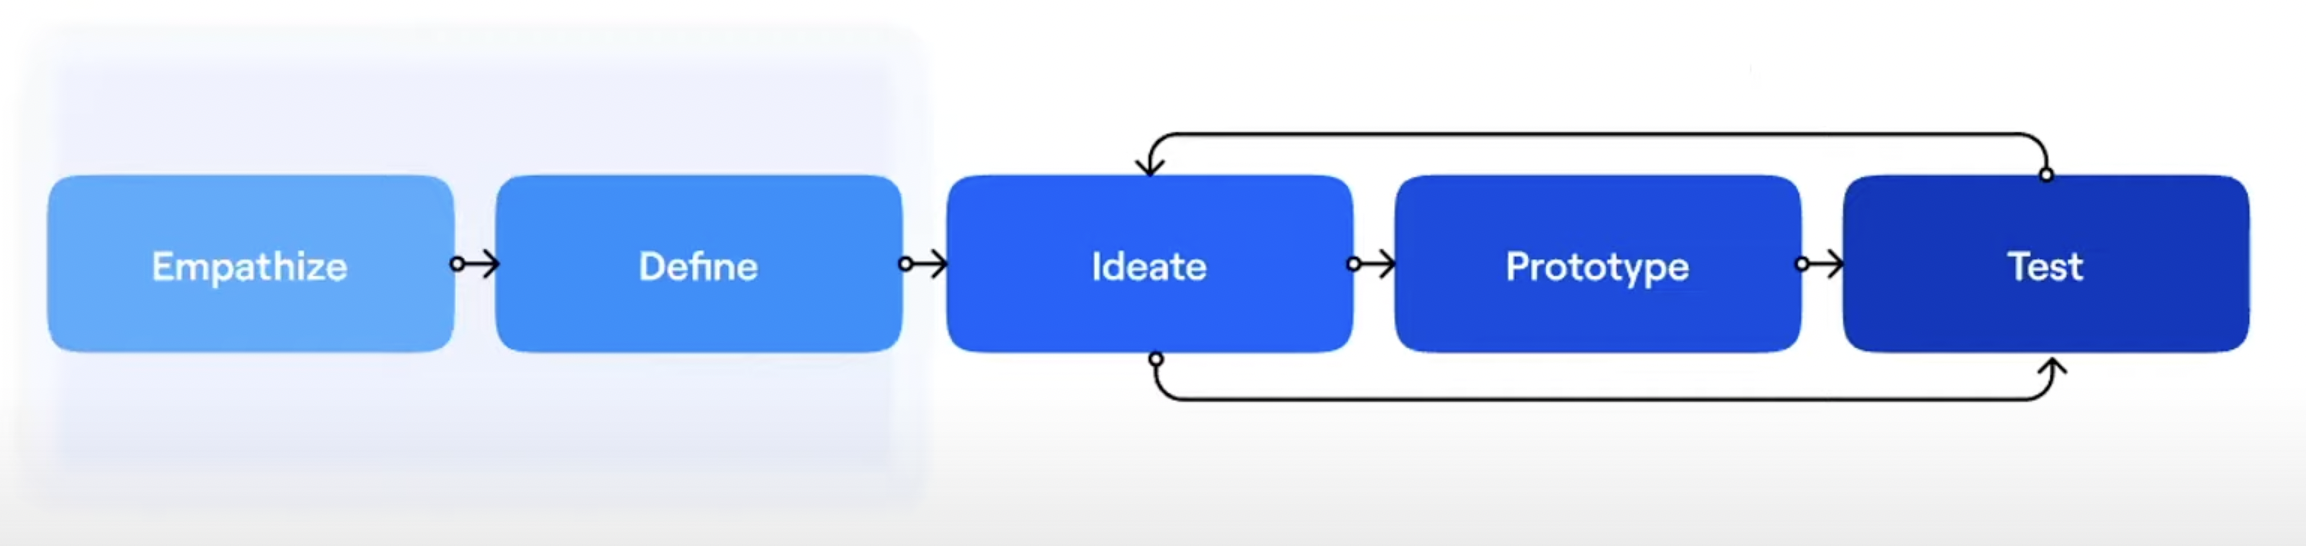 Diagram showing stages of product development with ideate, prototype, test looping back and repeating